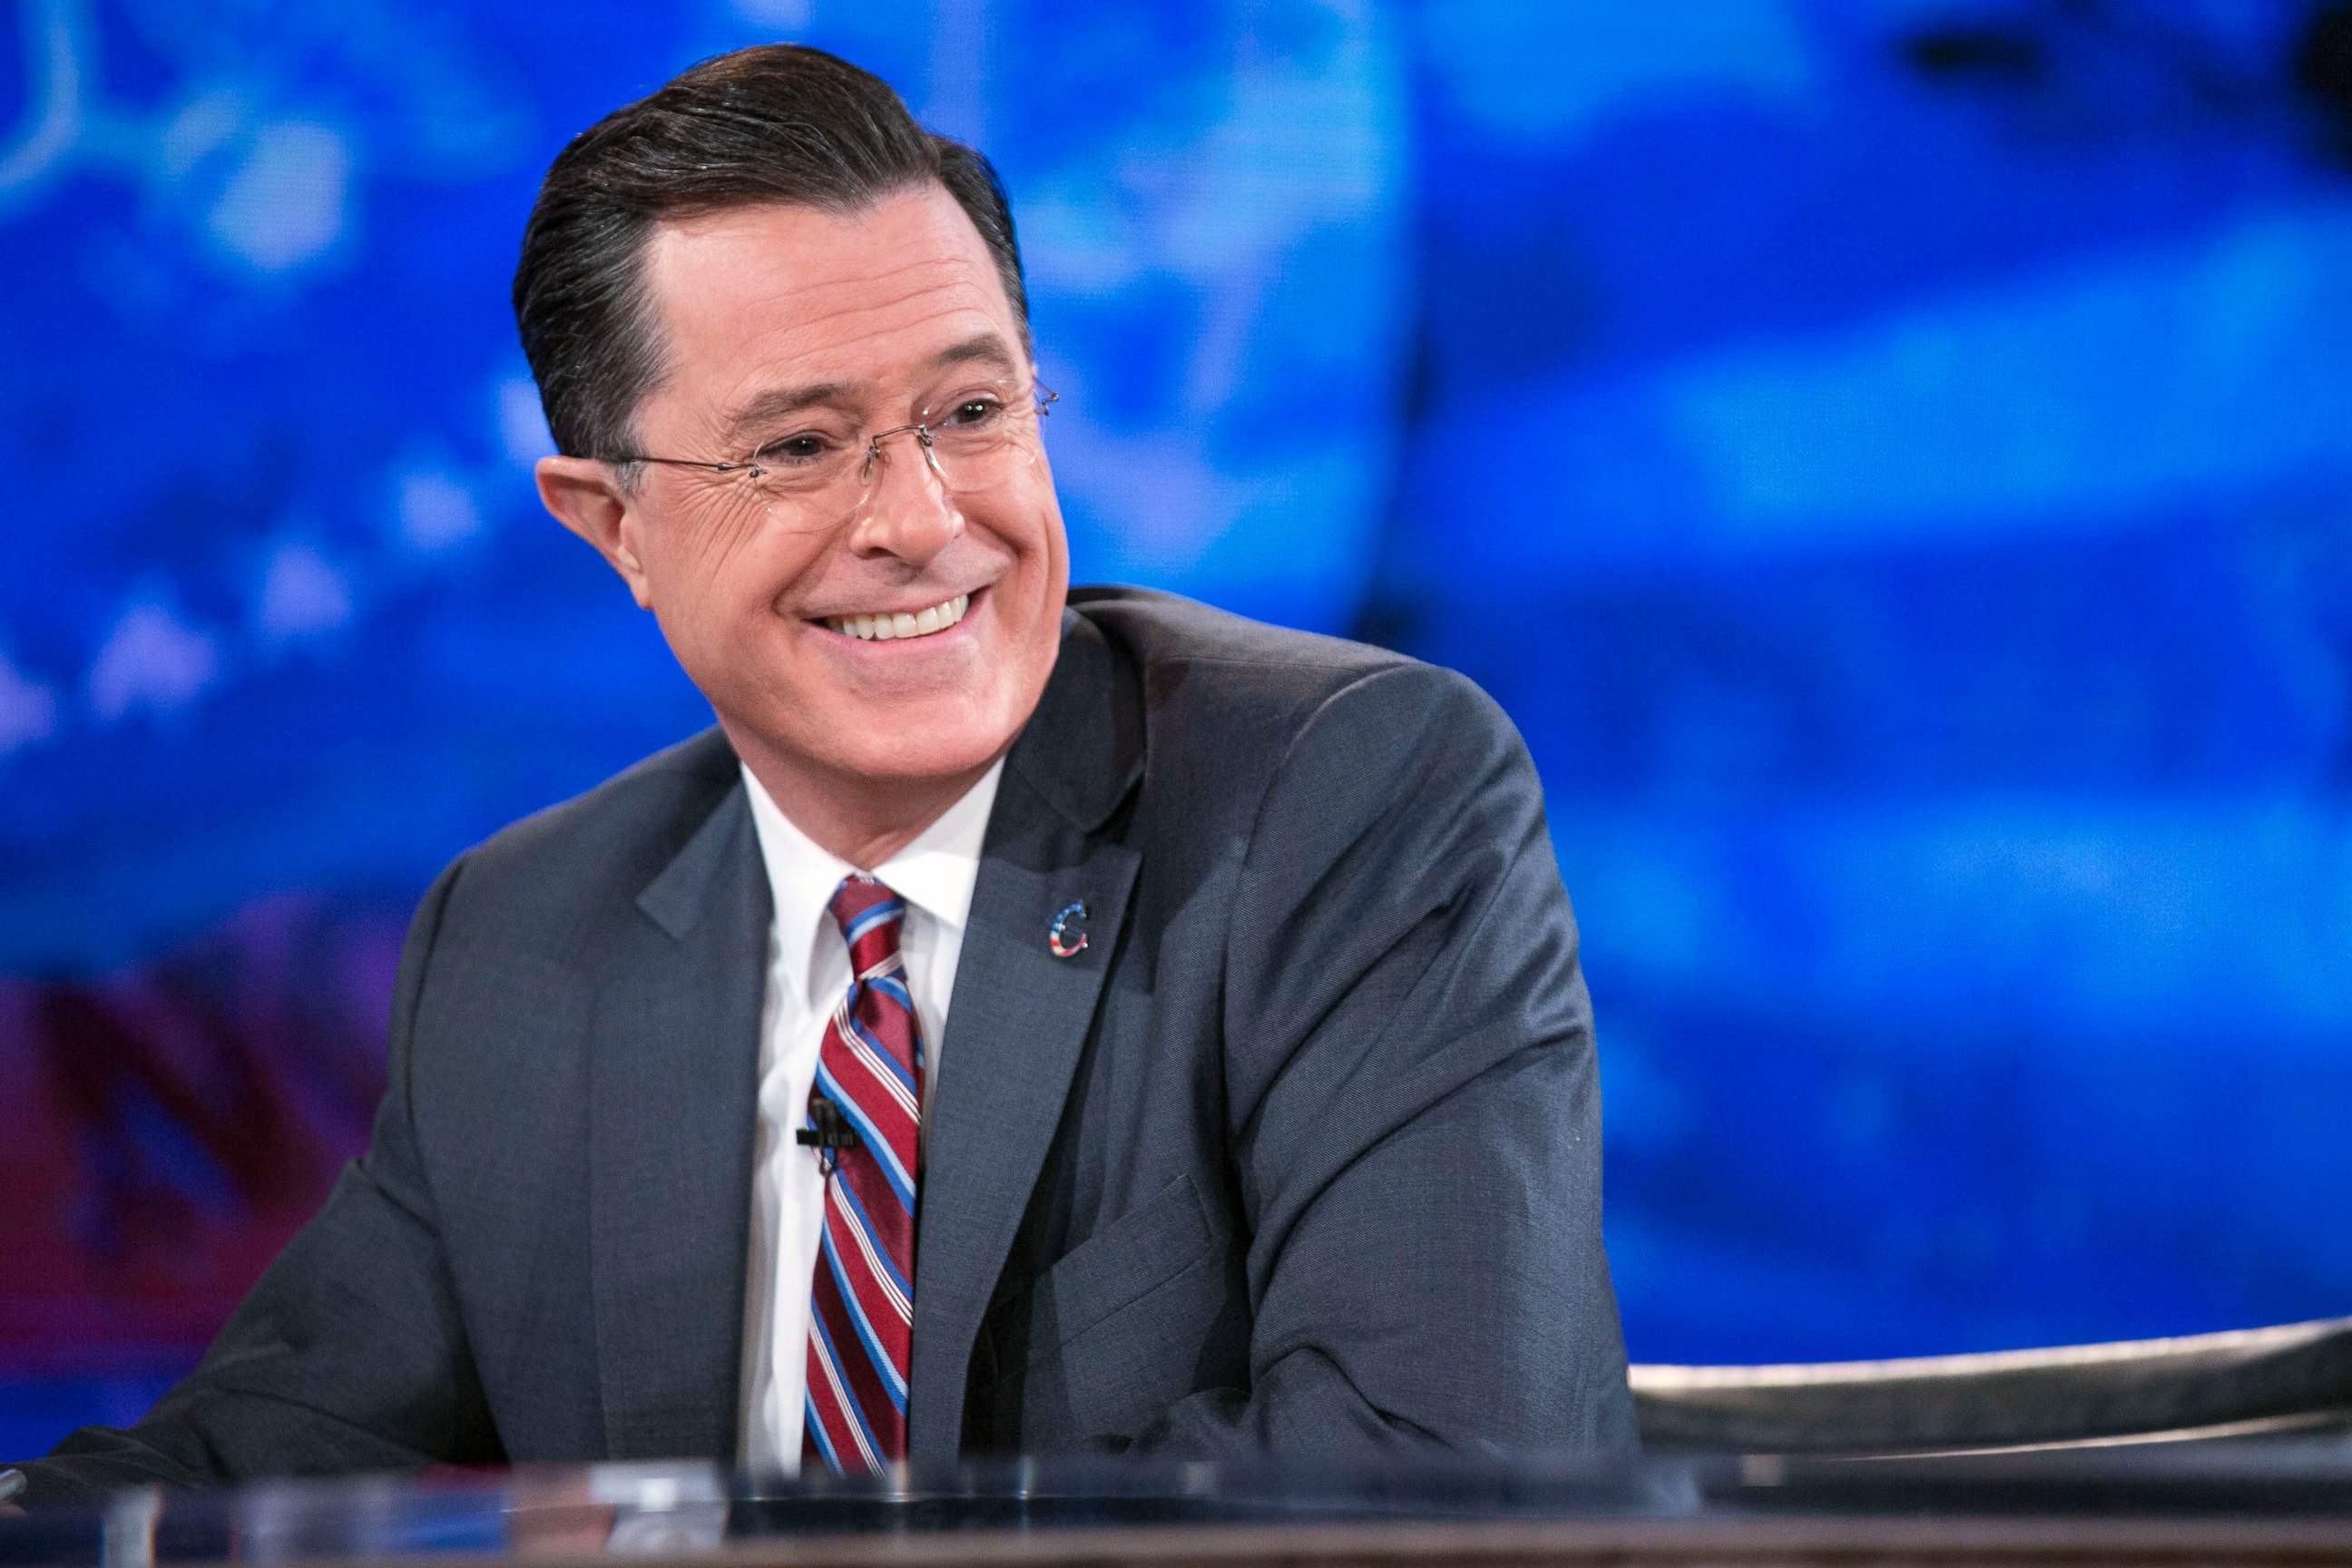 PHOTO: Stephen Colbert hosts a taping of Comedy Central's "The Colbert Report" in Lisner Auditorium at George Washington University on Dec. 8, 2014 in Washington, DC.